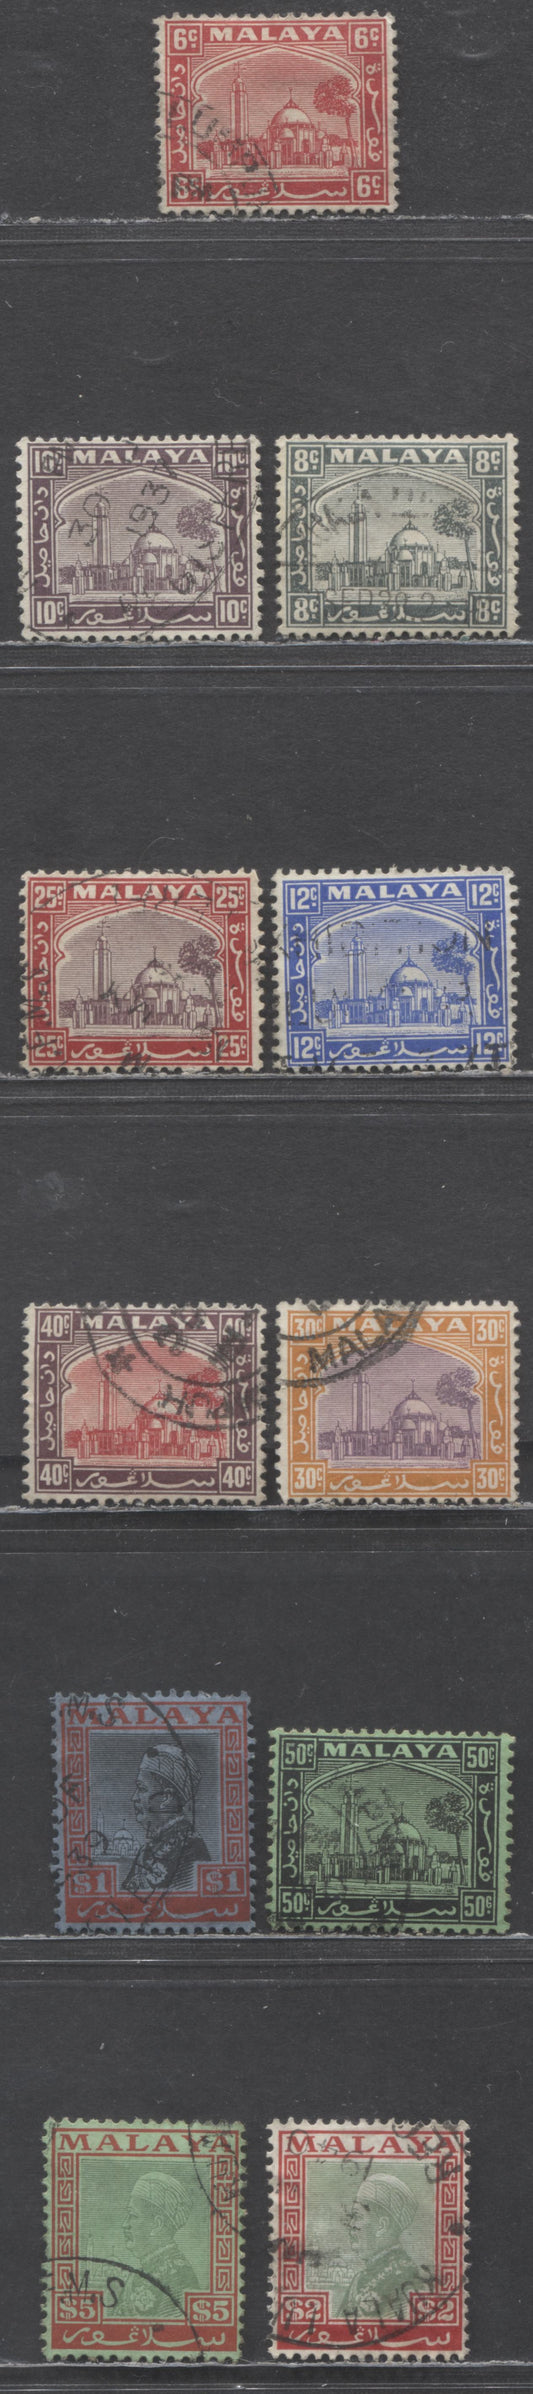 Lot 7 Malaya - Selanor SC#49-59 1935-1941 Klang Mosque & Sultan Sulaiman Definitives, 11 Very Fine Used Singles, Click on Listing to See ALL Pictures, 2022 Scott Classic Cat. $45.25